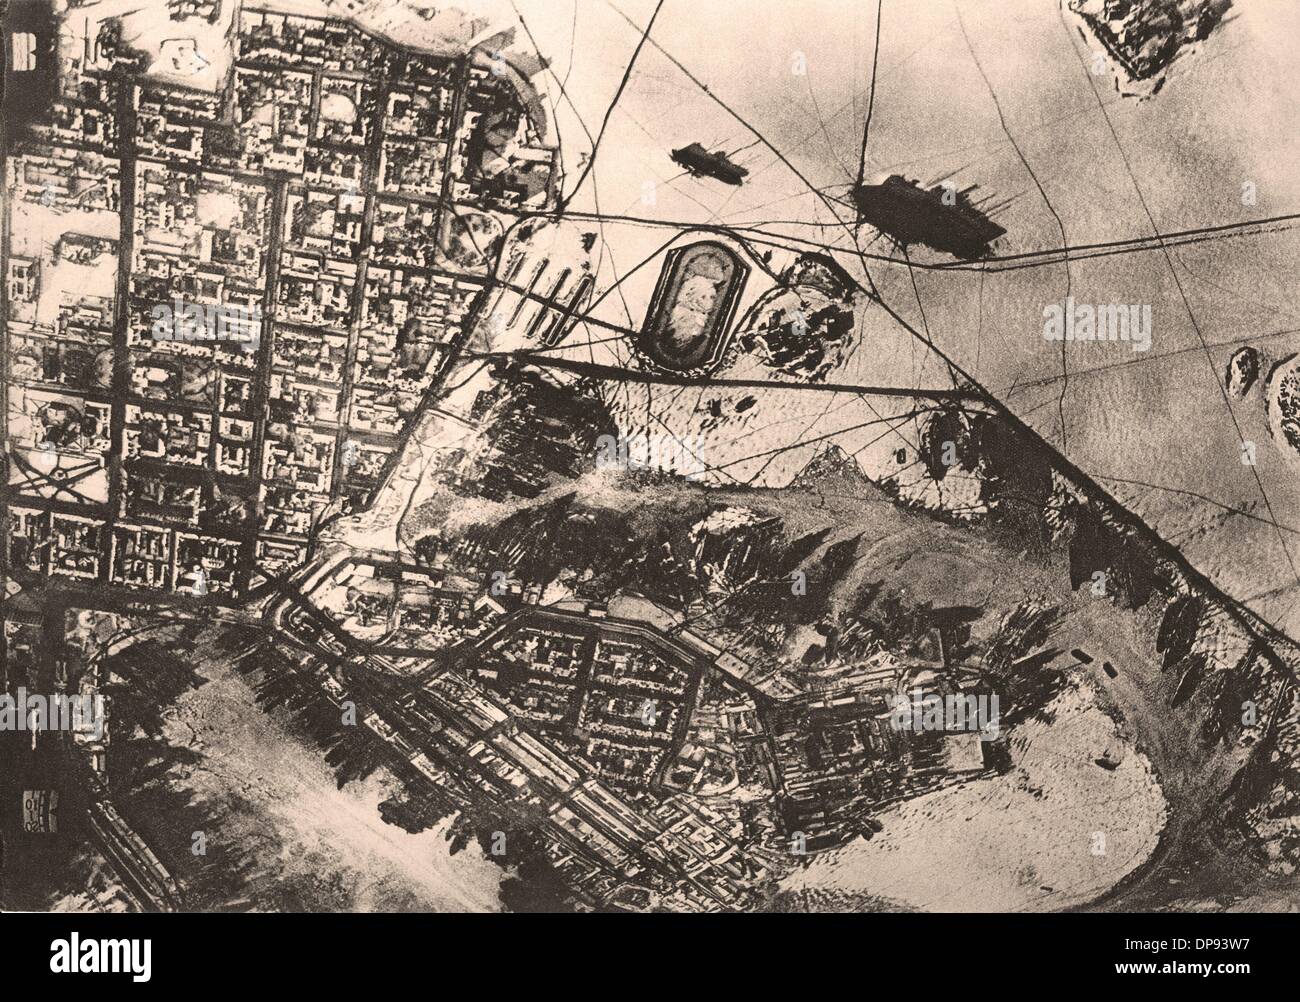 Aerial view of the harbour of Helsinki, capital of Finland. Date unknown. German troops supported the newly formed independent Senate of Finland during the Civil War in Spring 1918. Fotoarchiv für Zeitgeschichte Stock Photo